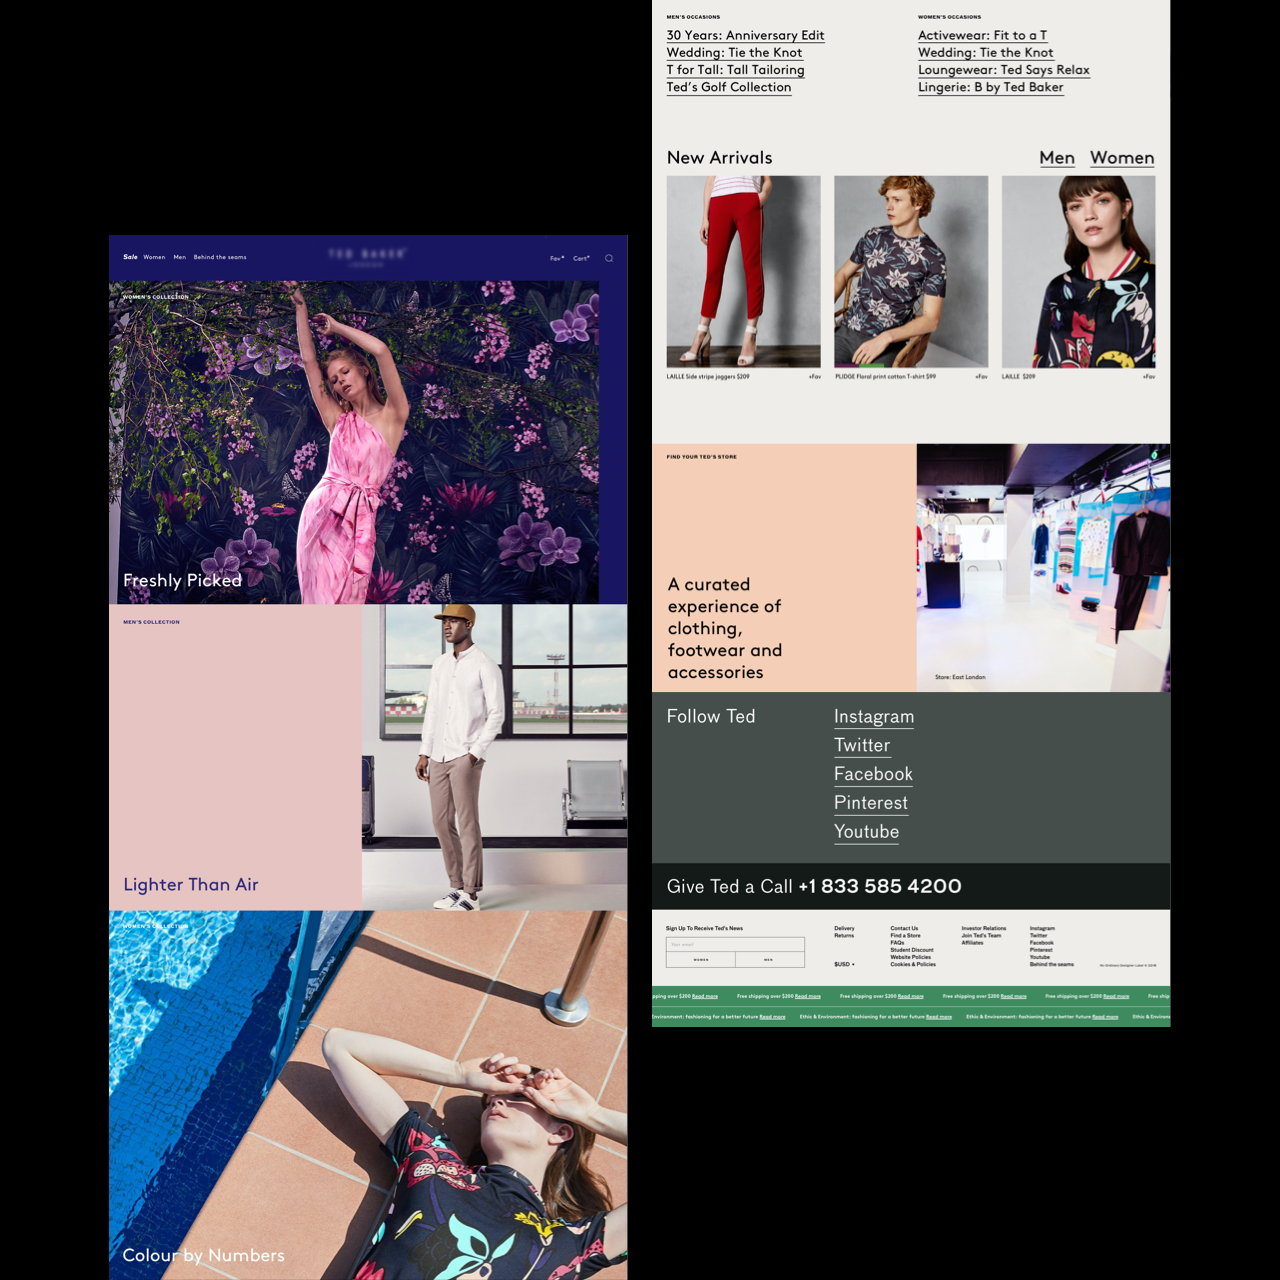 Landing page proposal for a British fashion brand e-commerce.